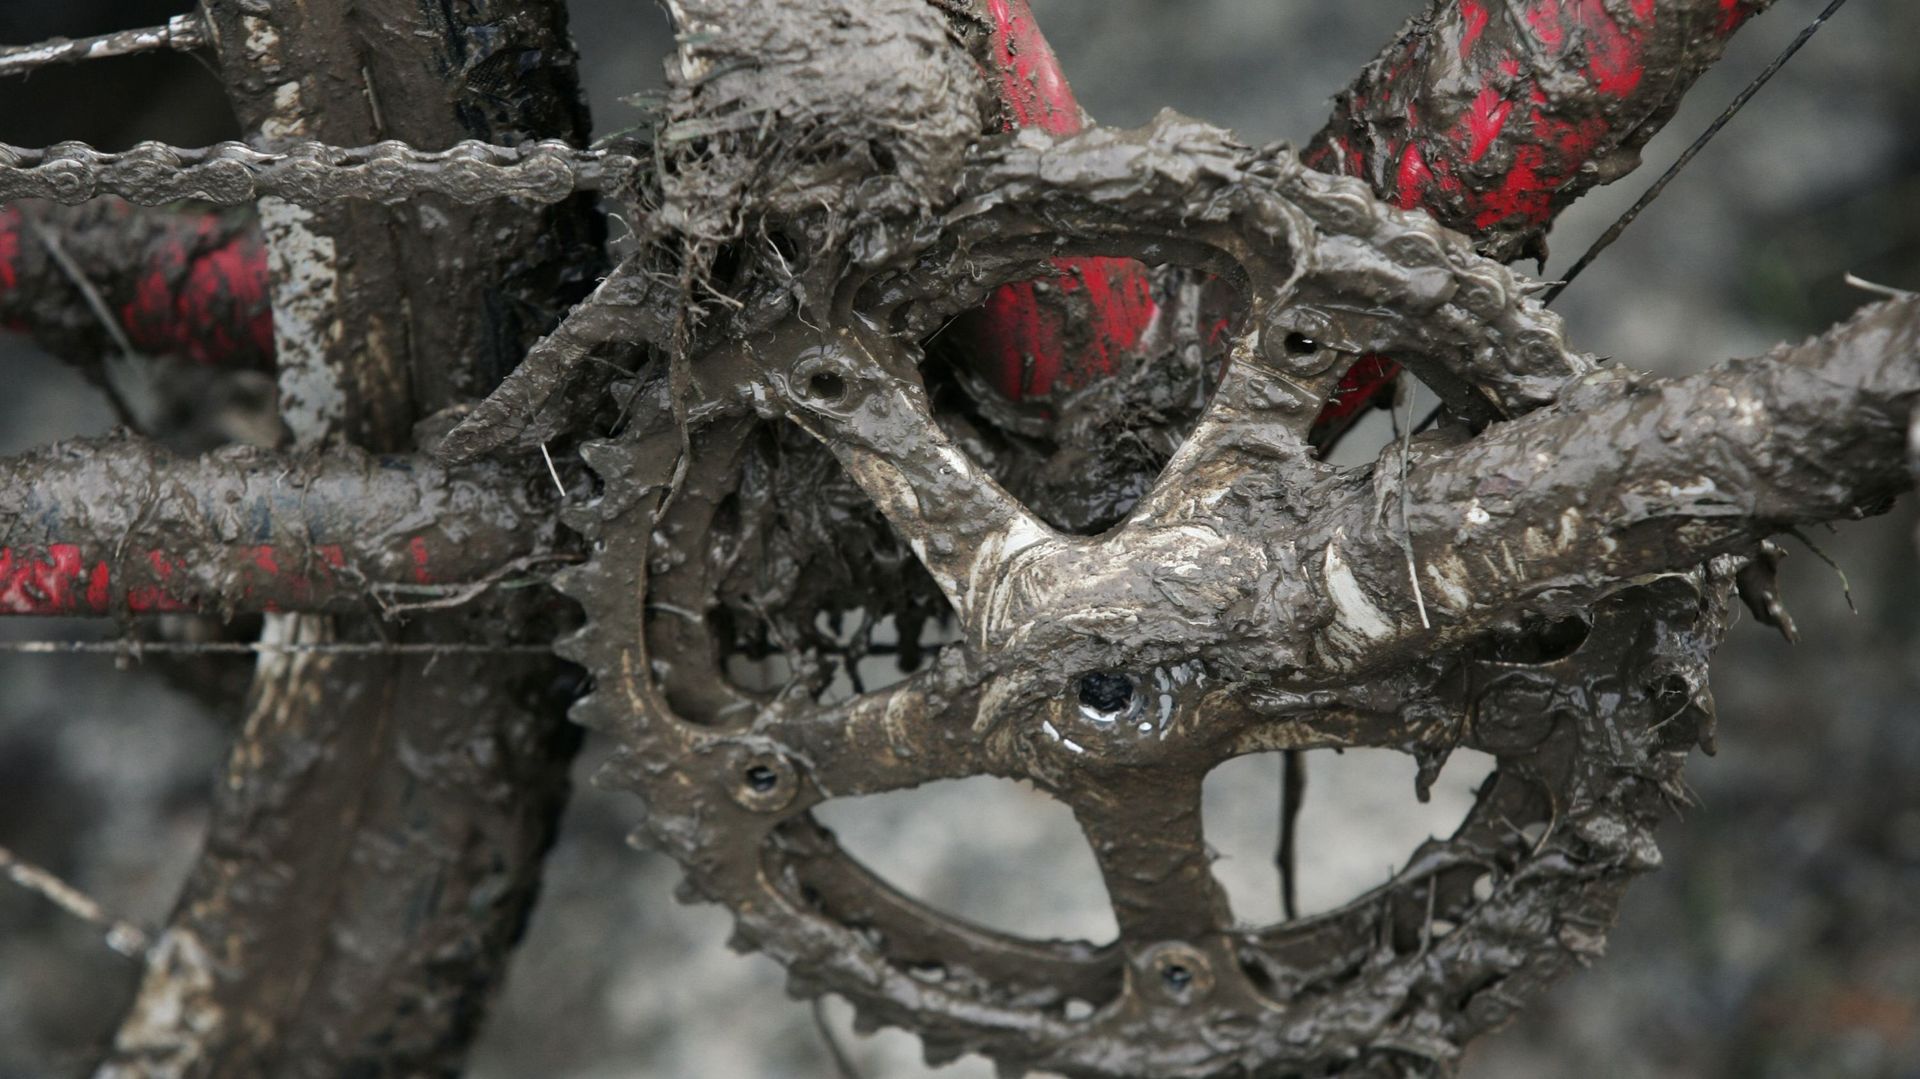 A close up view of a muddy cyclo-cross bike.